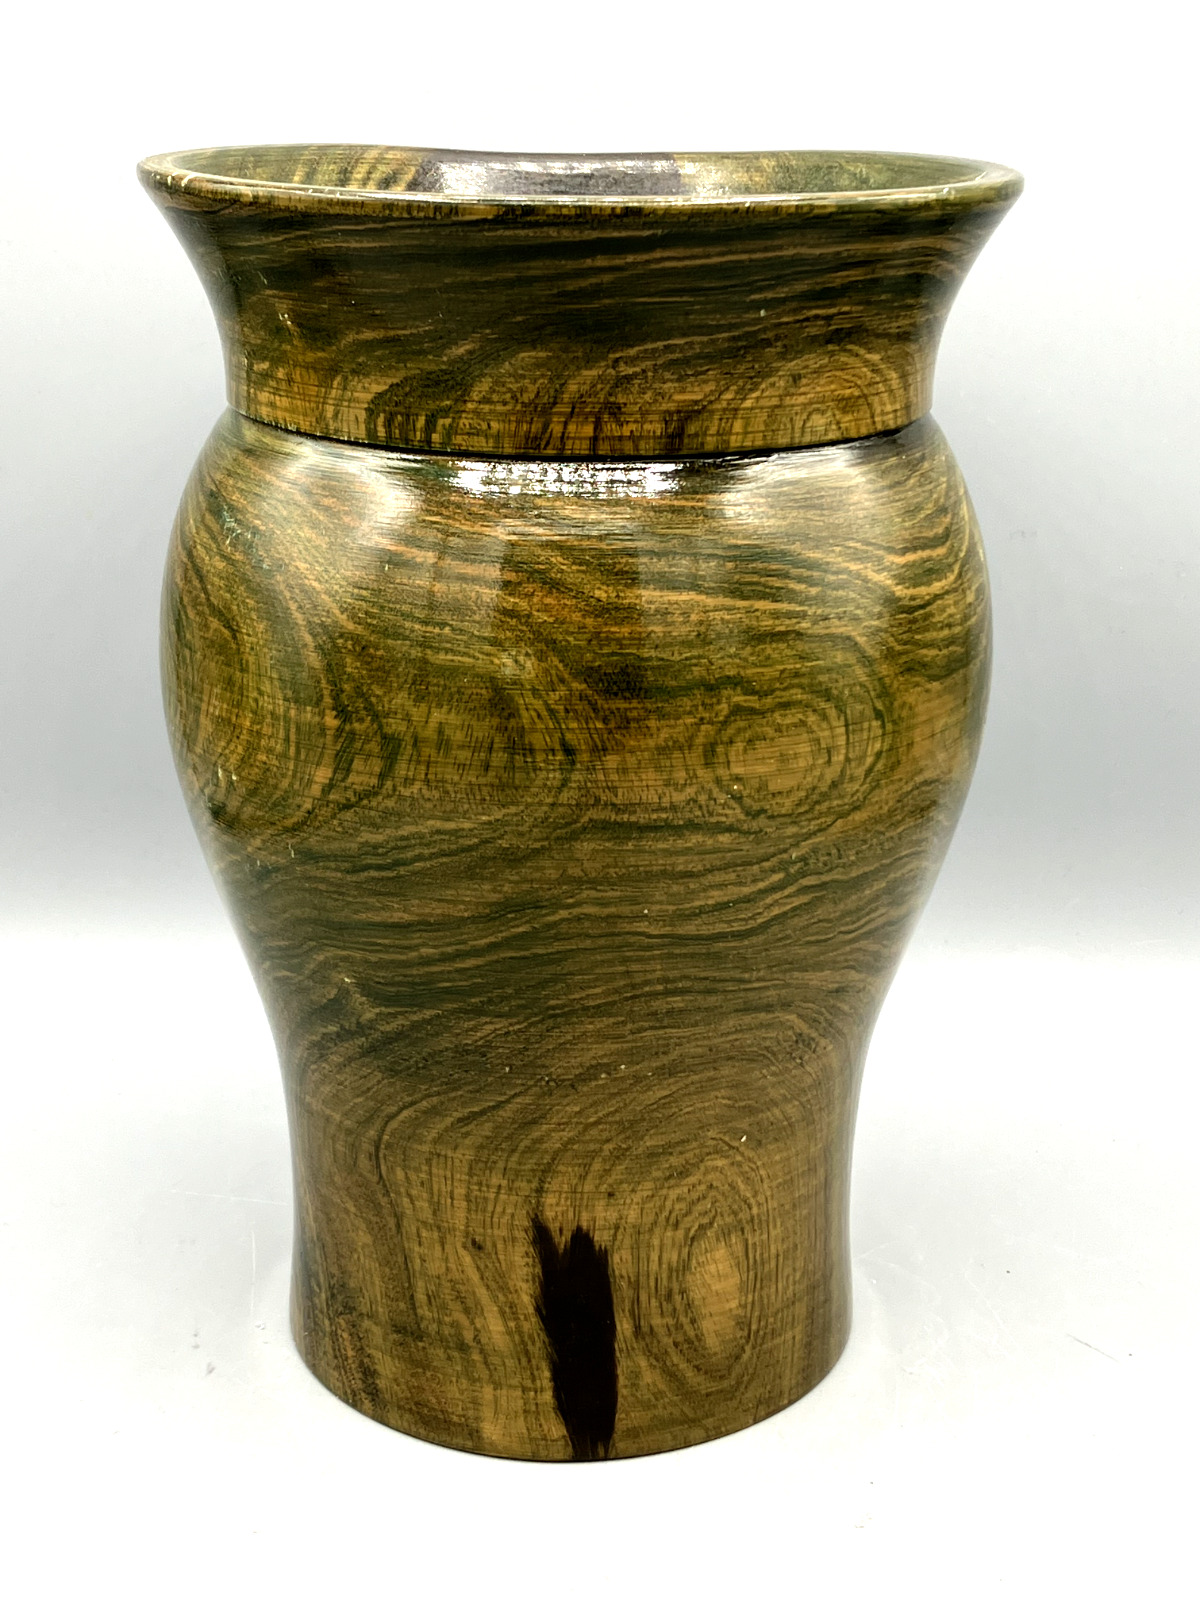 Beautiful Wood Lathe Vase Stained and Polished Hollow Heavy Grain